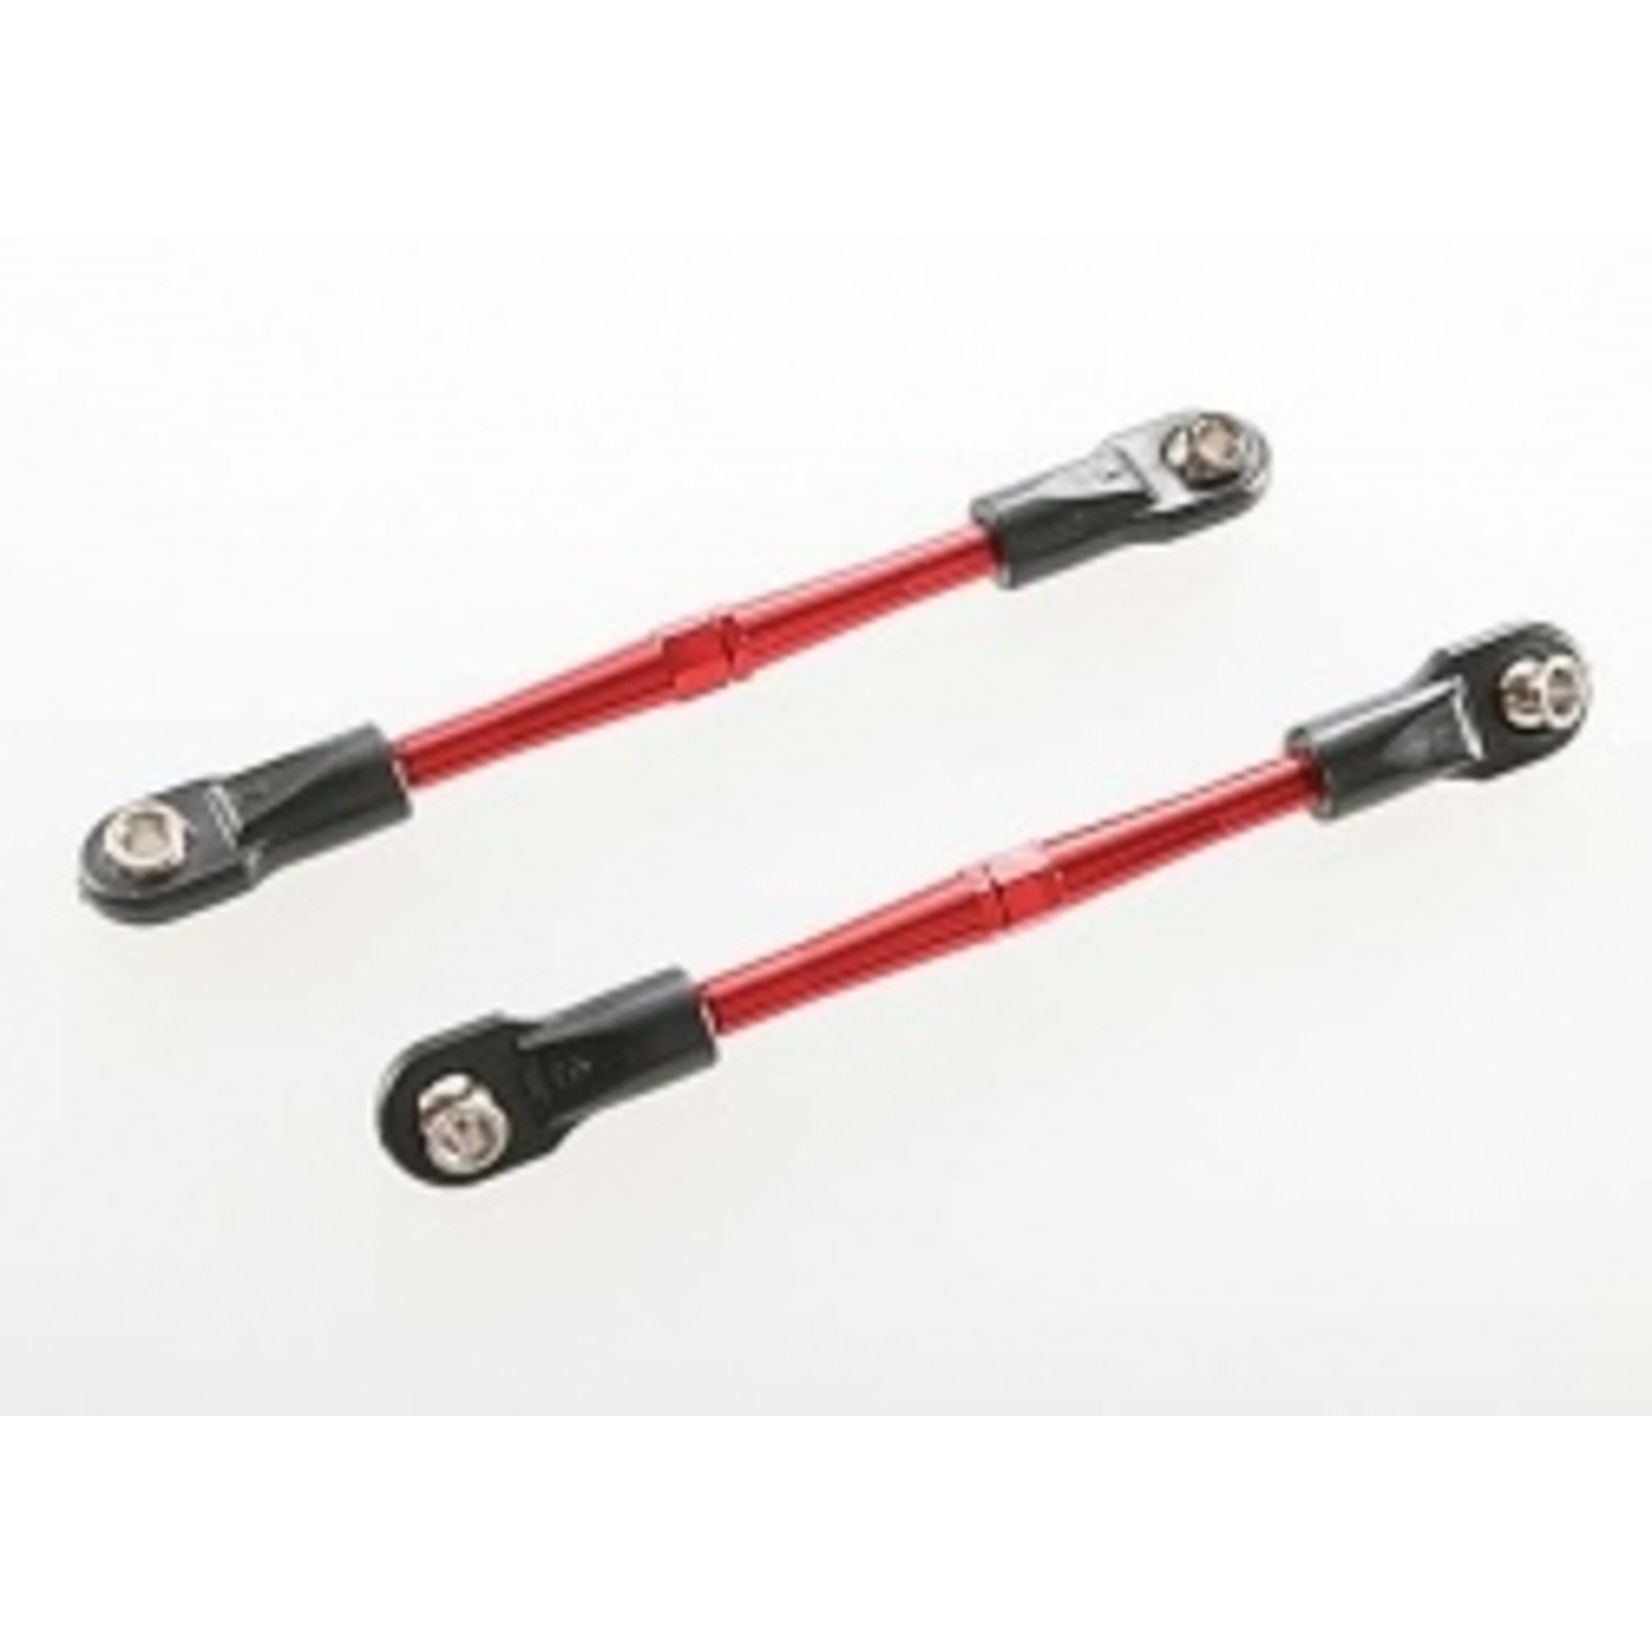 Traxxas 3139X Turnbuckles, aluminum (red-anodized), toe links, 59mm (2) (assembled with rod ends & hollow balls) (requires 5mm aluminum wrench #5477)